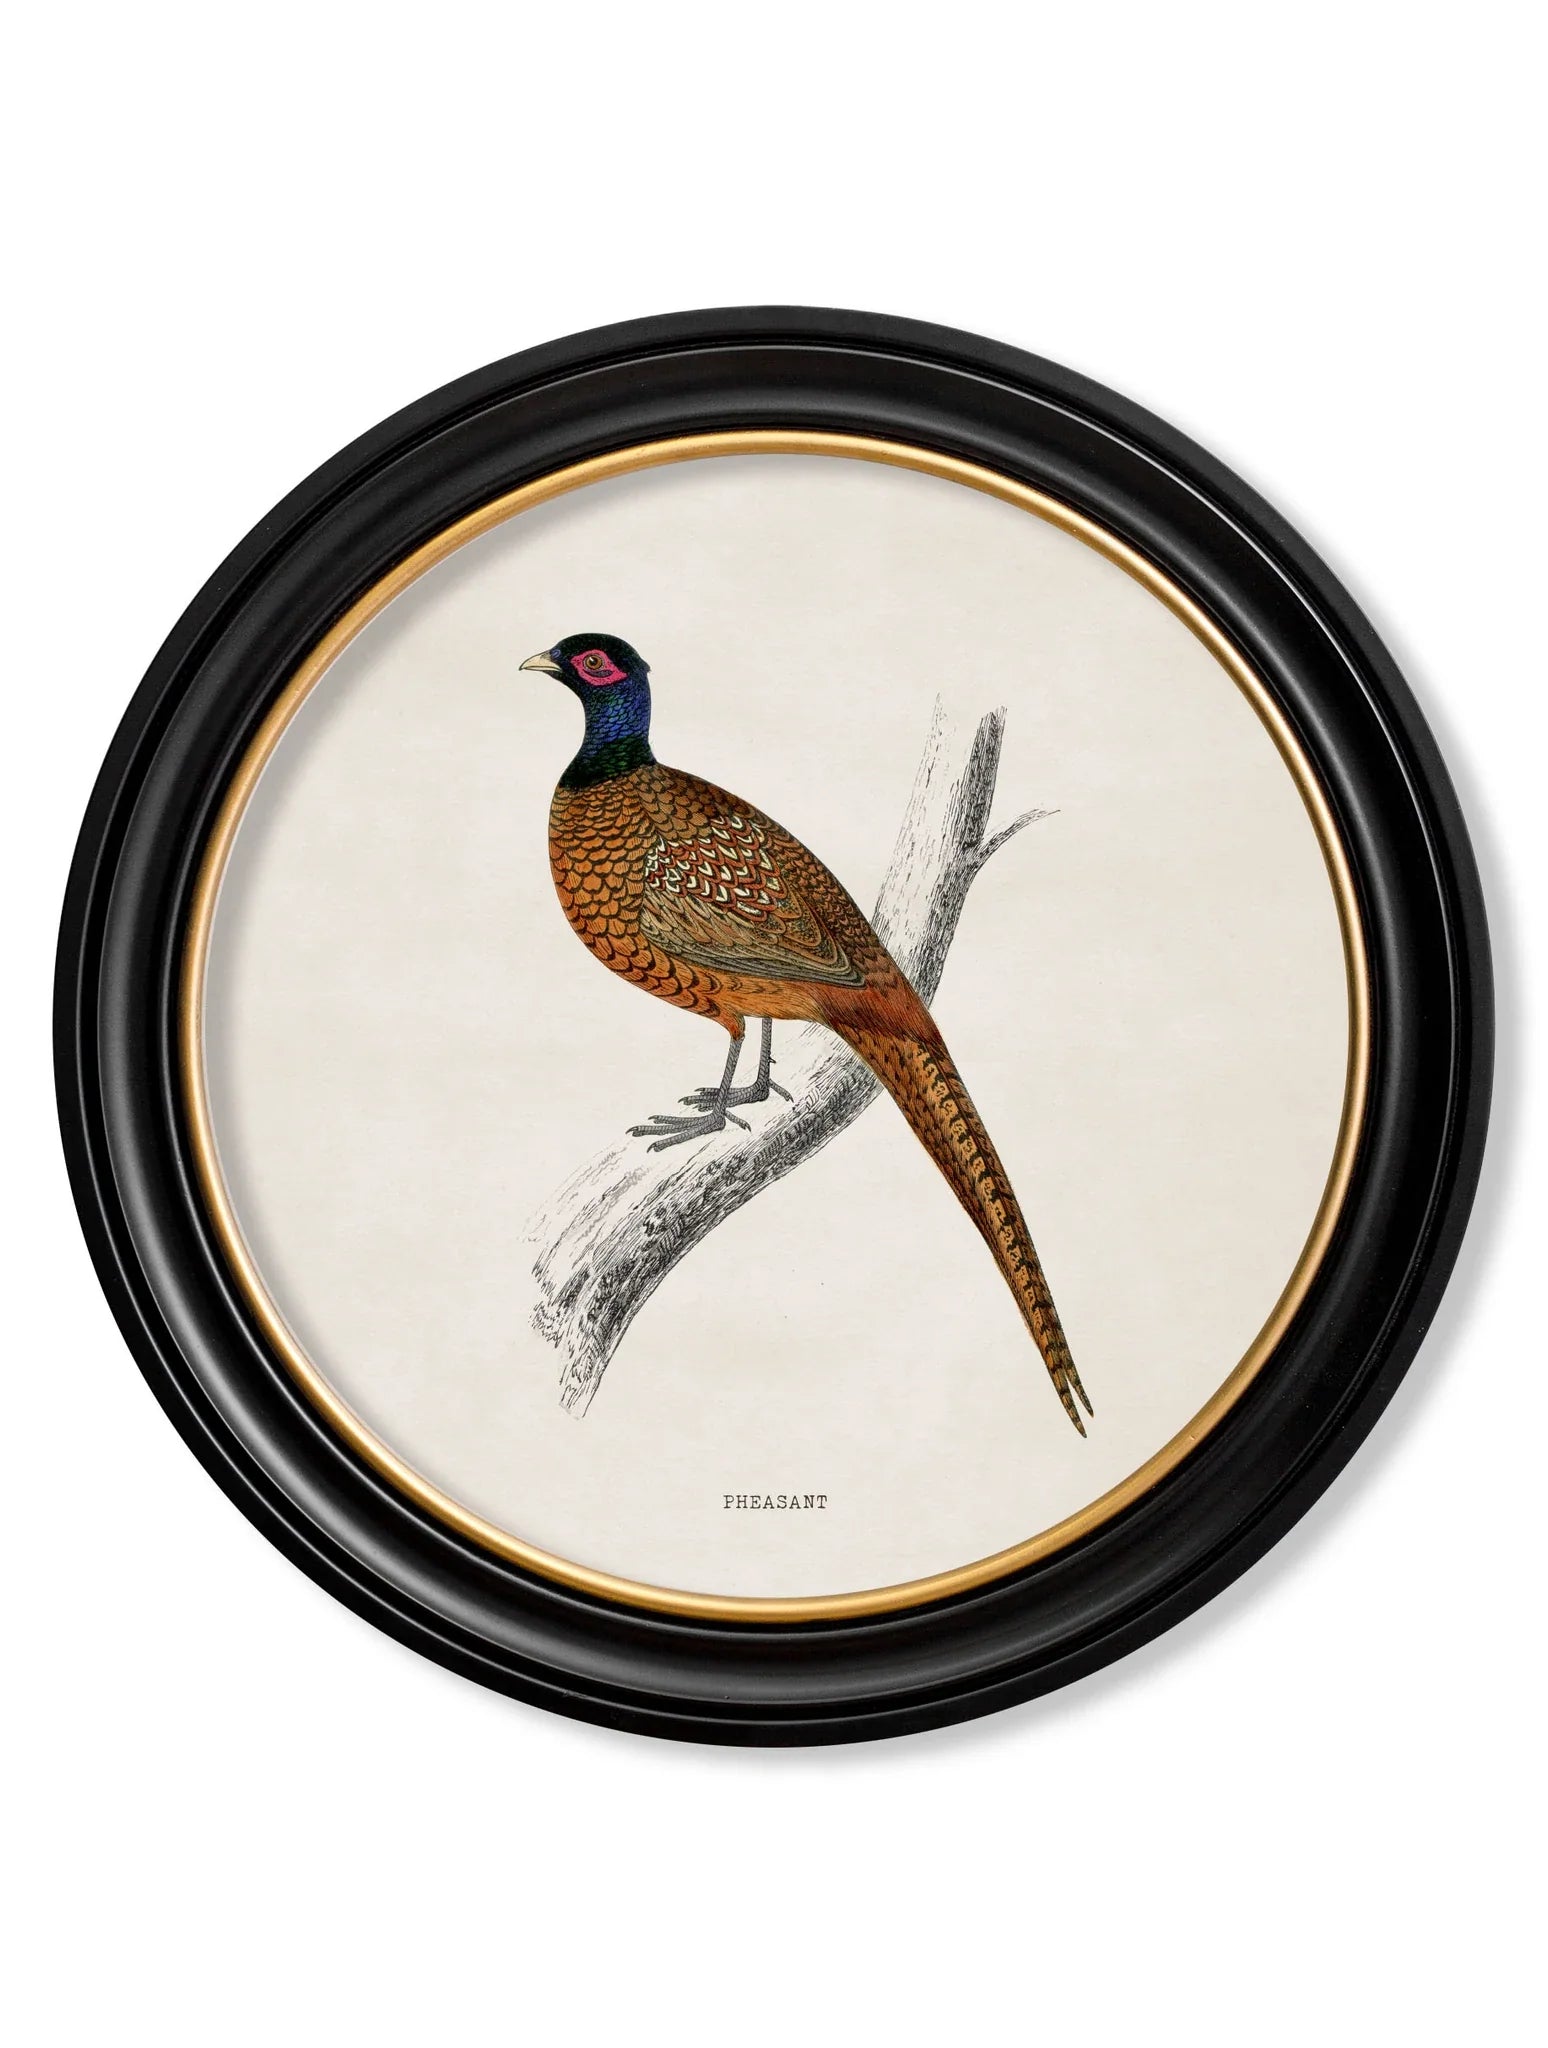 C.1809 British Birds In Round Frames for sale - Woodcock and Cavendish